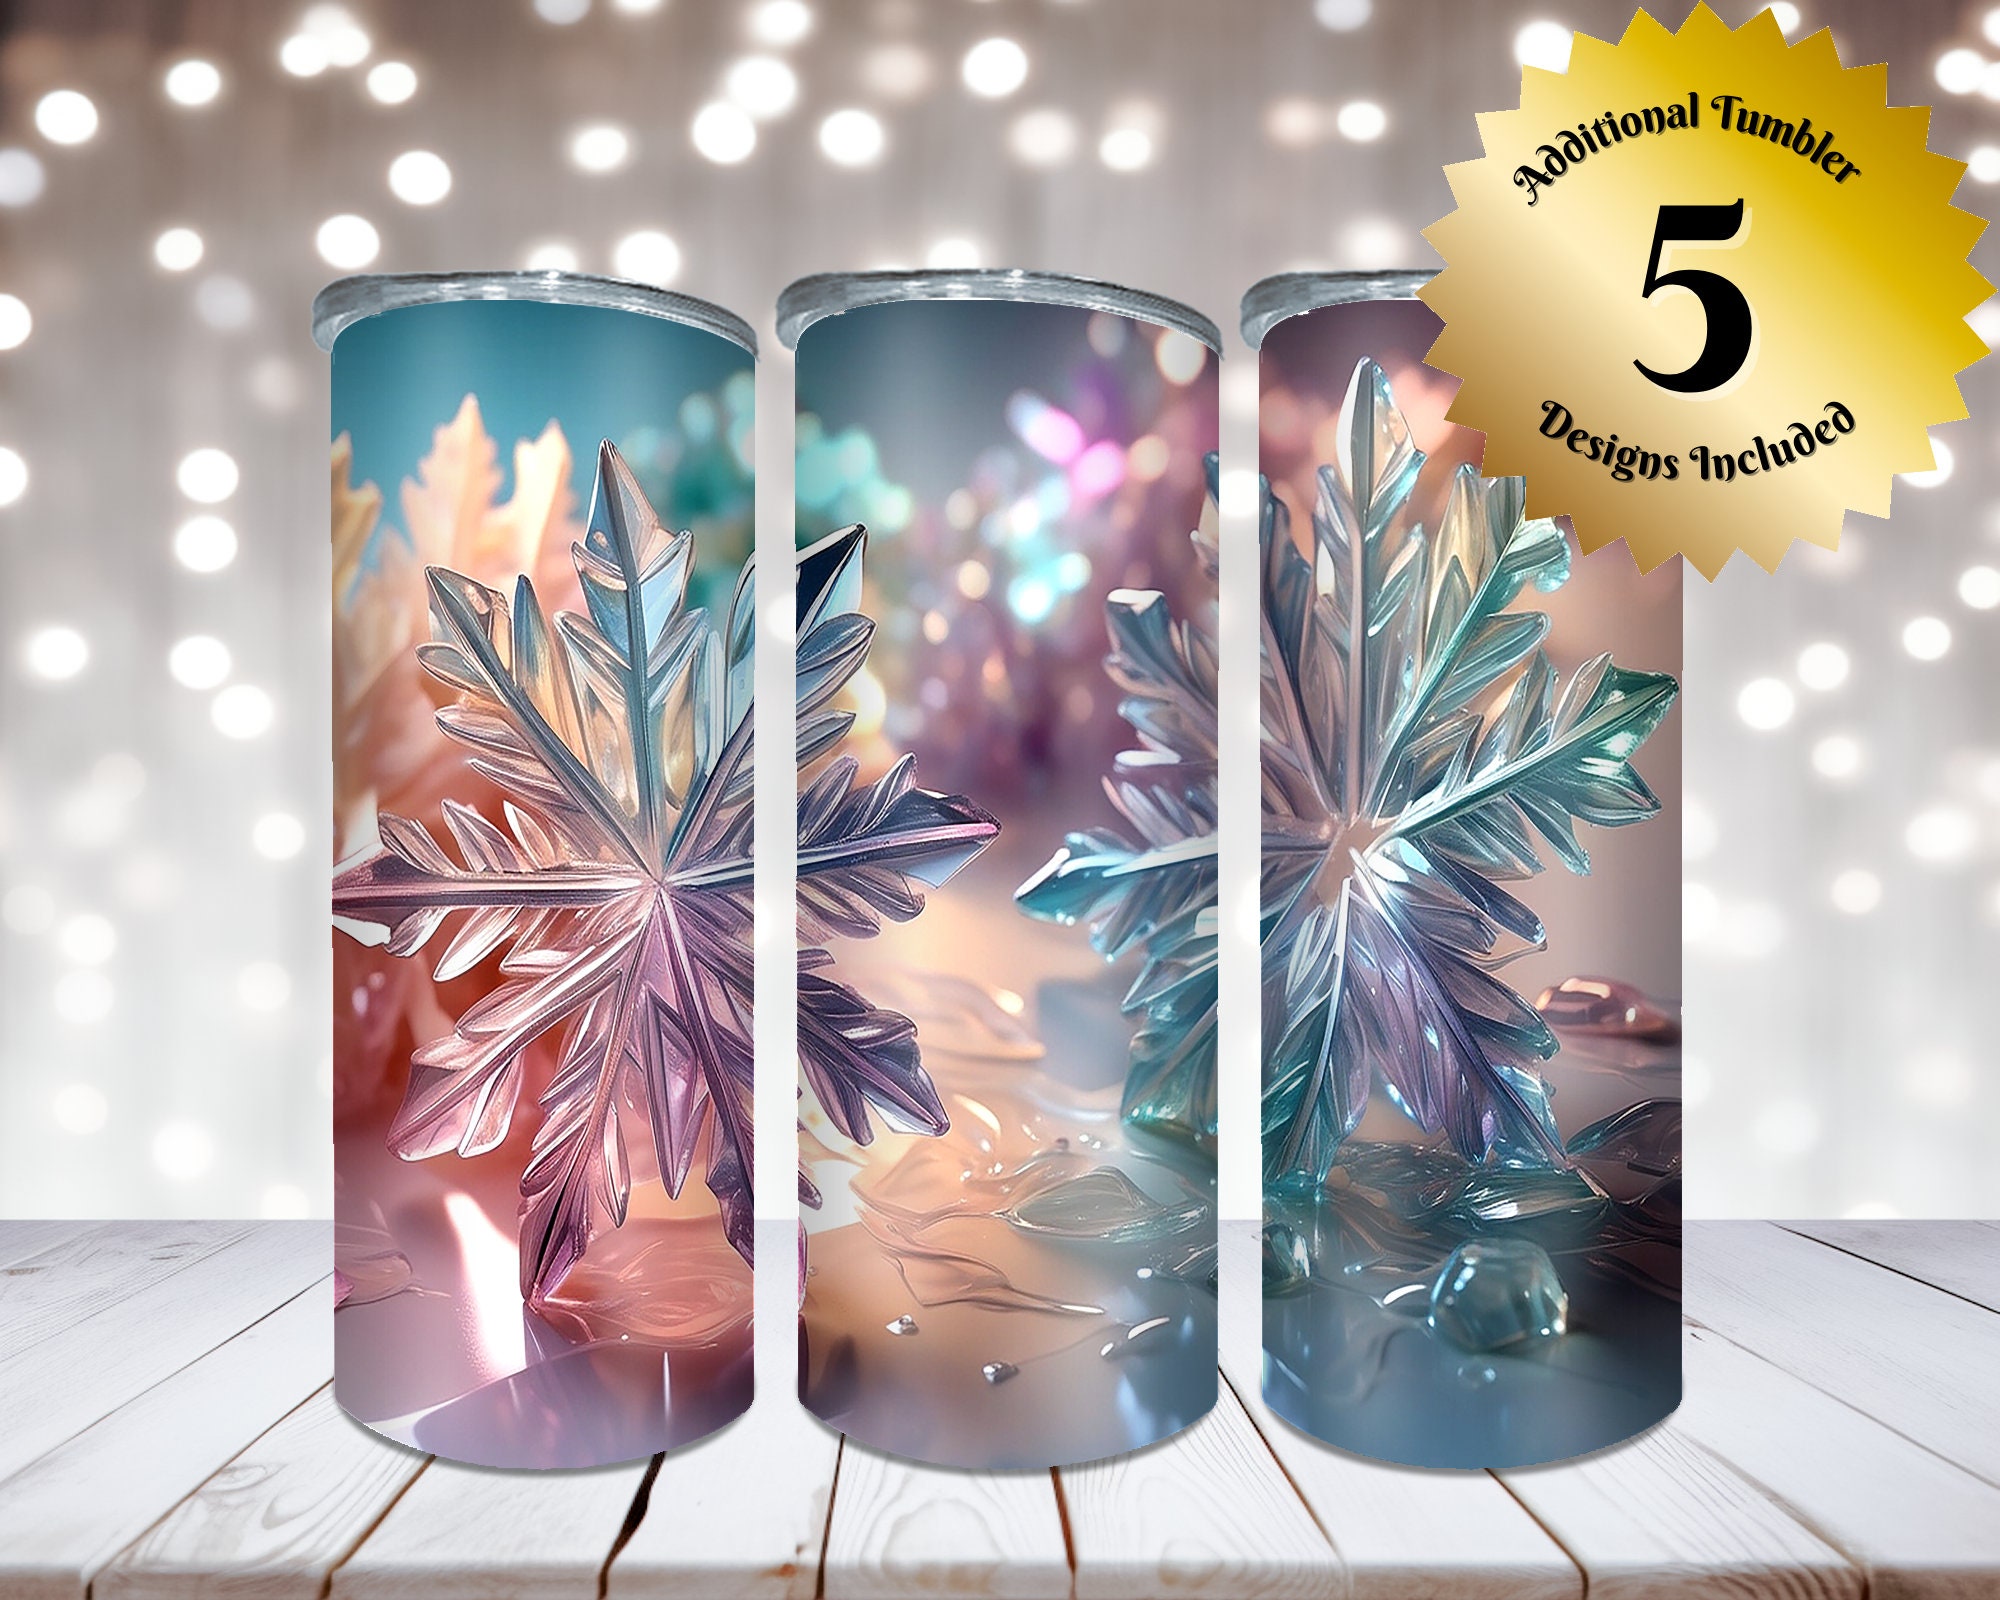 Alofecl Trendy Tumbler snowflake Tumbler holly night Aesthetic Tumbler with  Lids,Gifts for friends,C…See more Alofecl Trendy Tumbler snowflake Tumbler